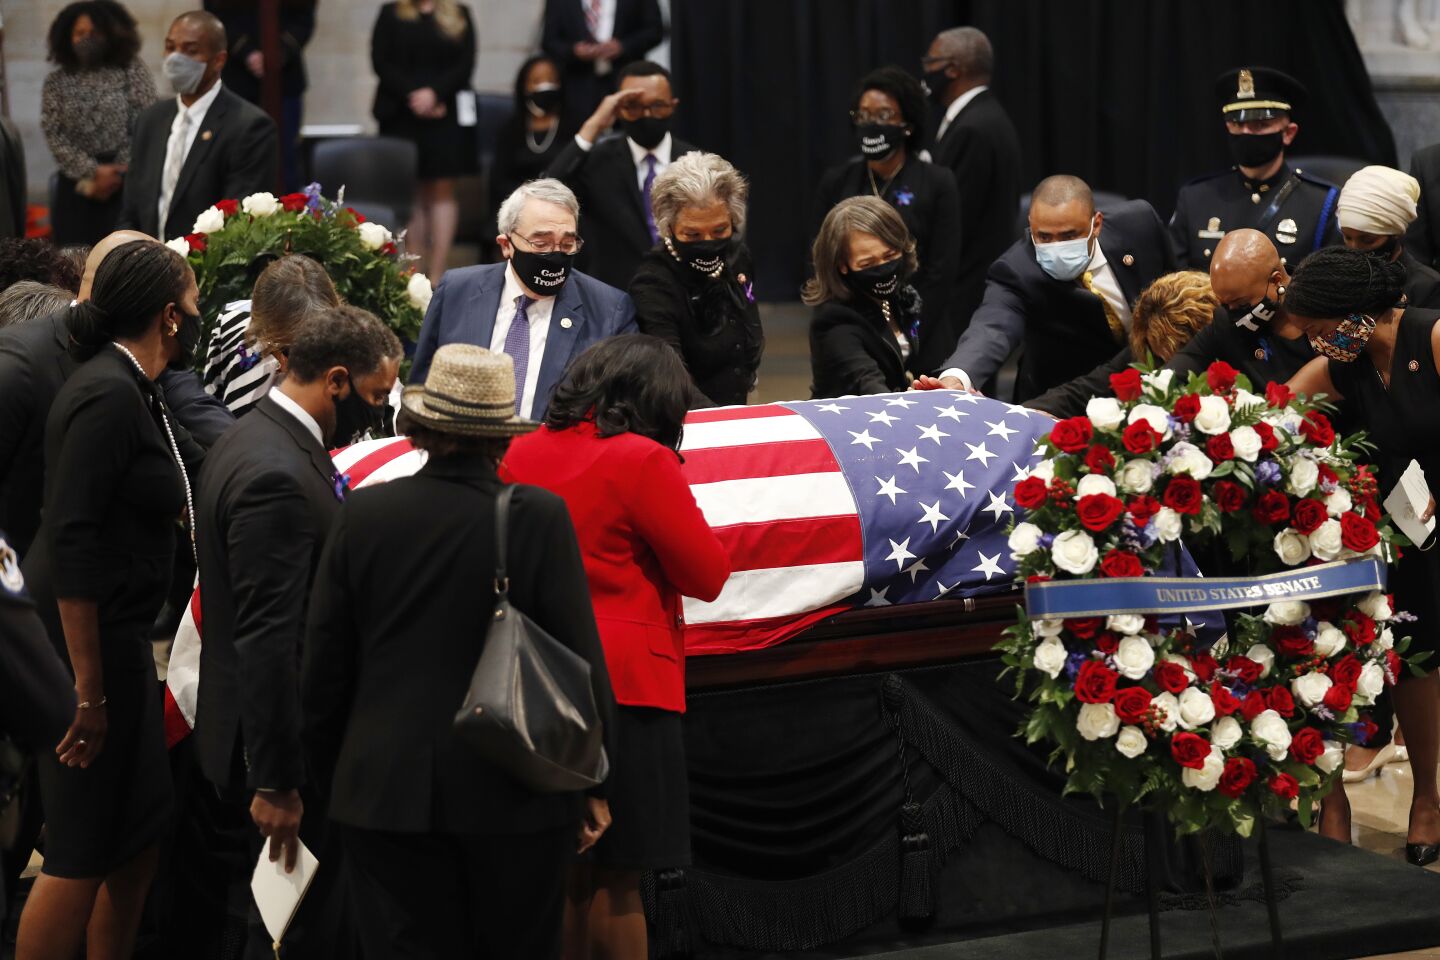 People pay respects to Rep. John Lewis, D-Ga., as he lies in state in the Capitol Rotunda, Monday in Washington.